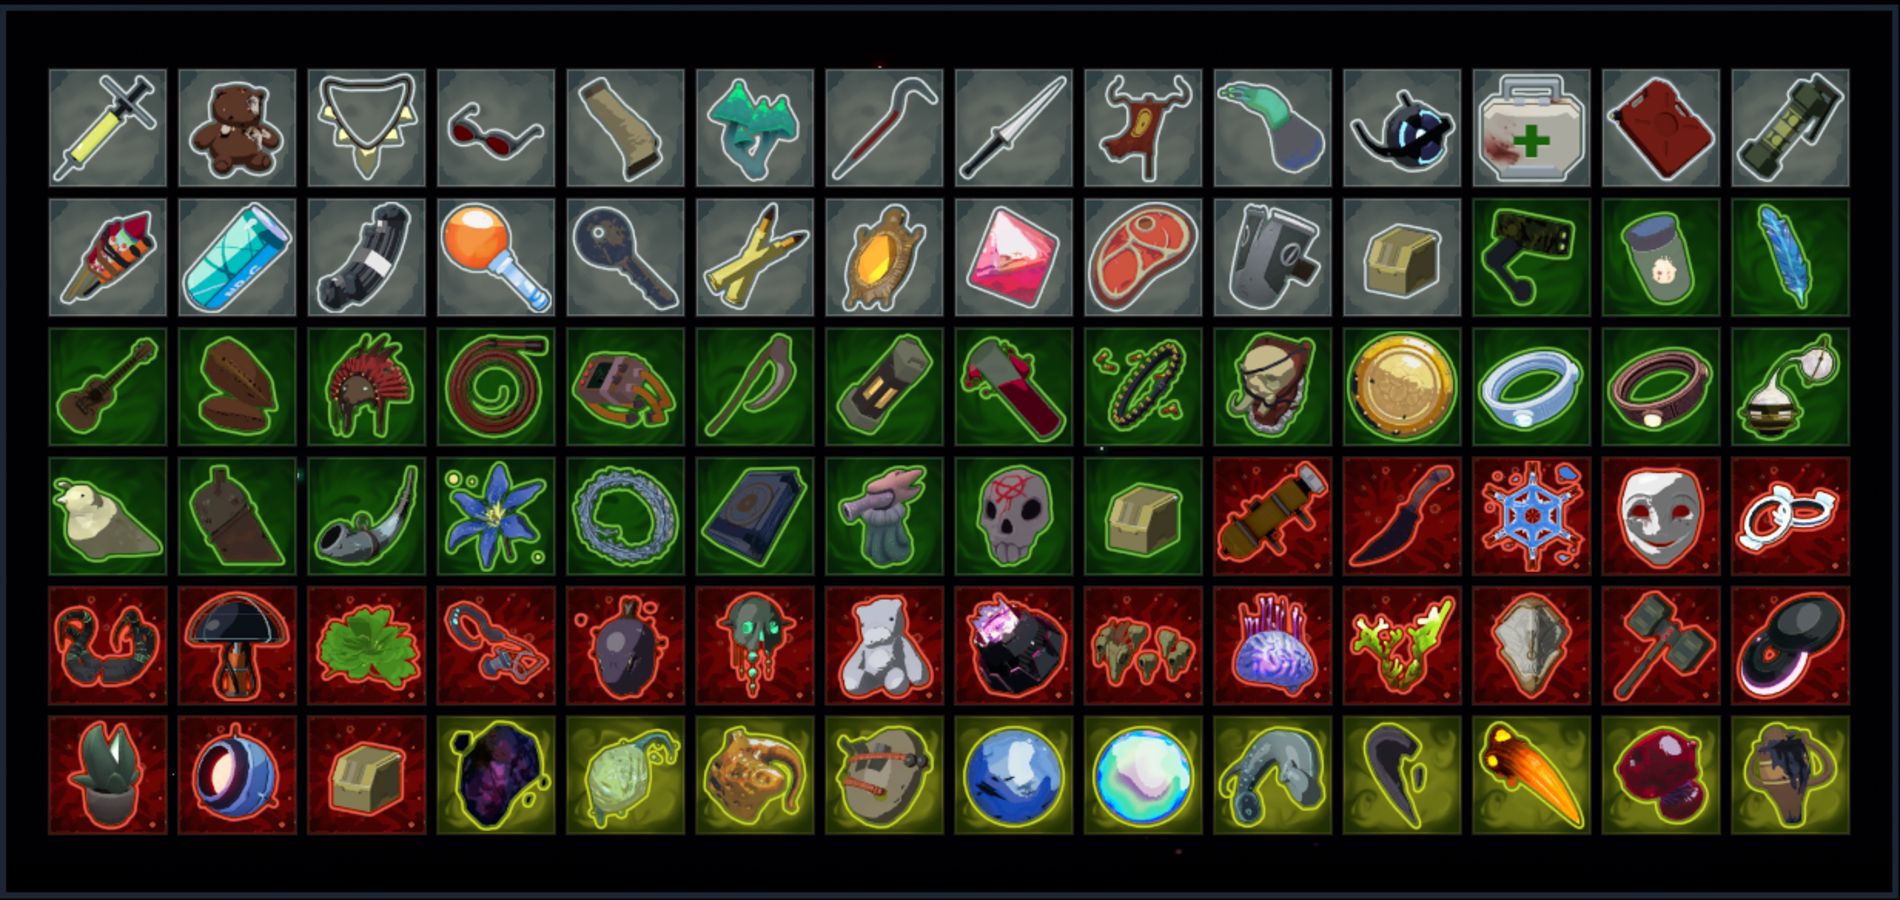 All items from Risk of Rain 2